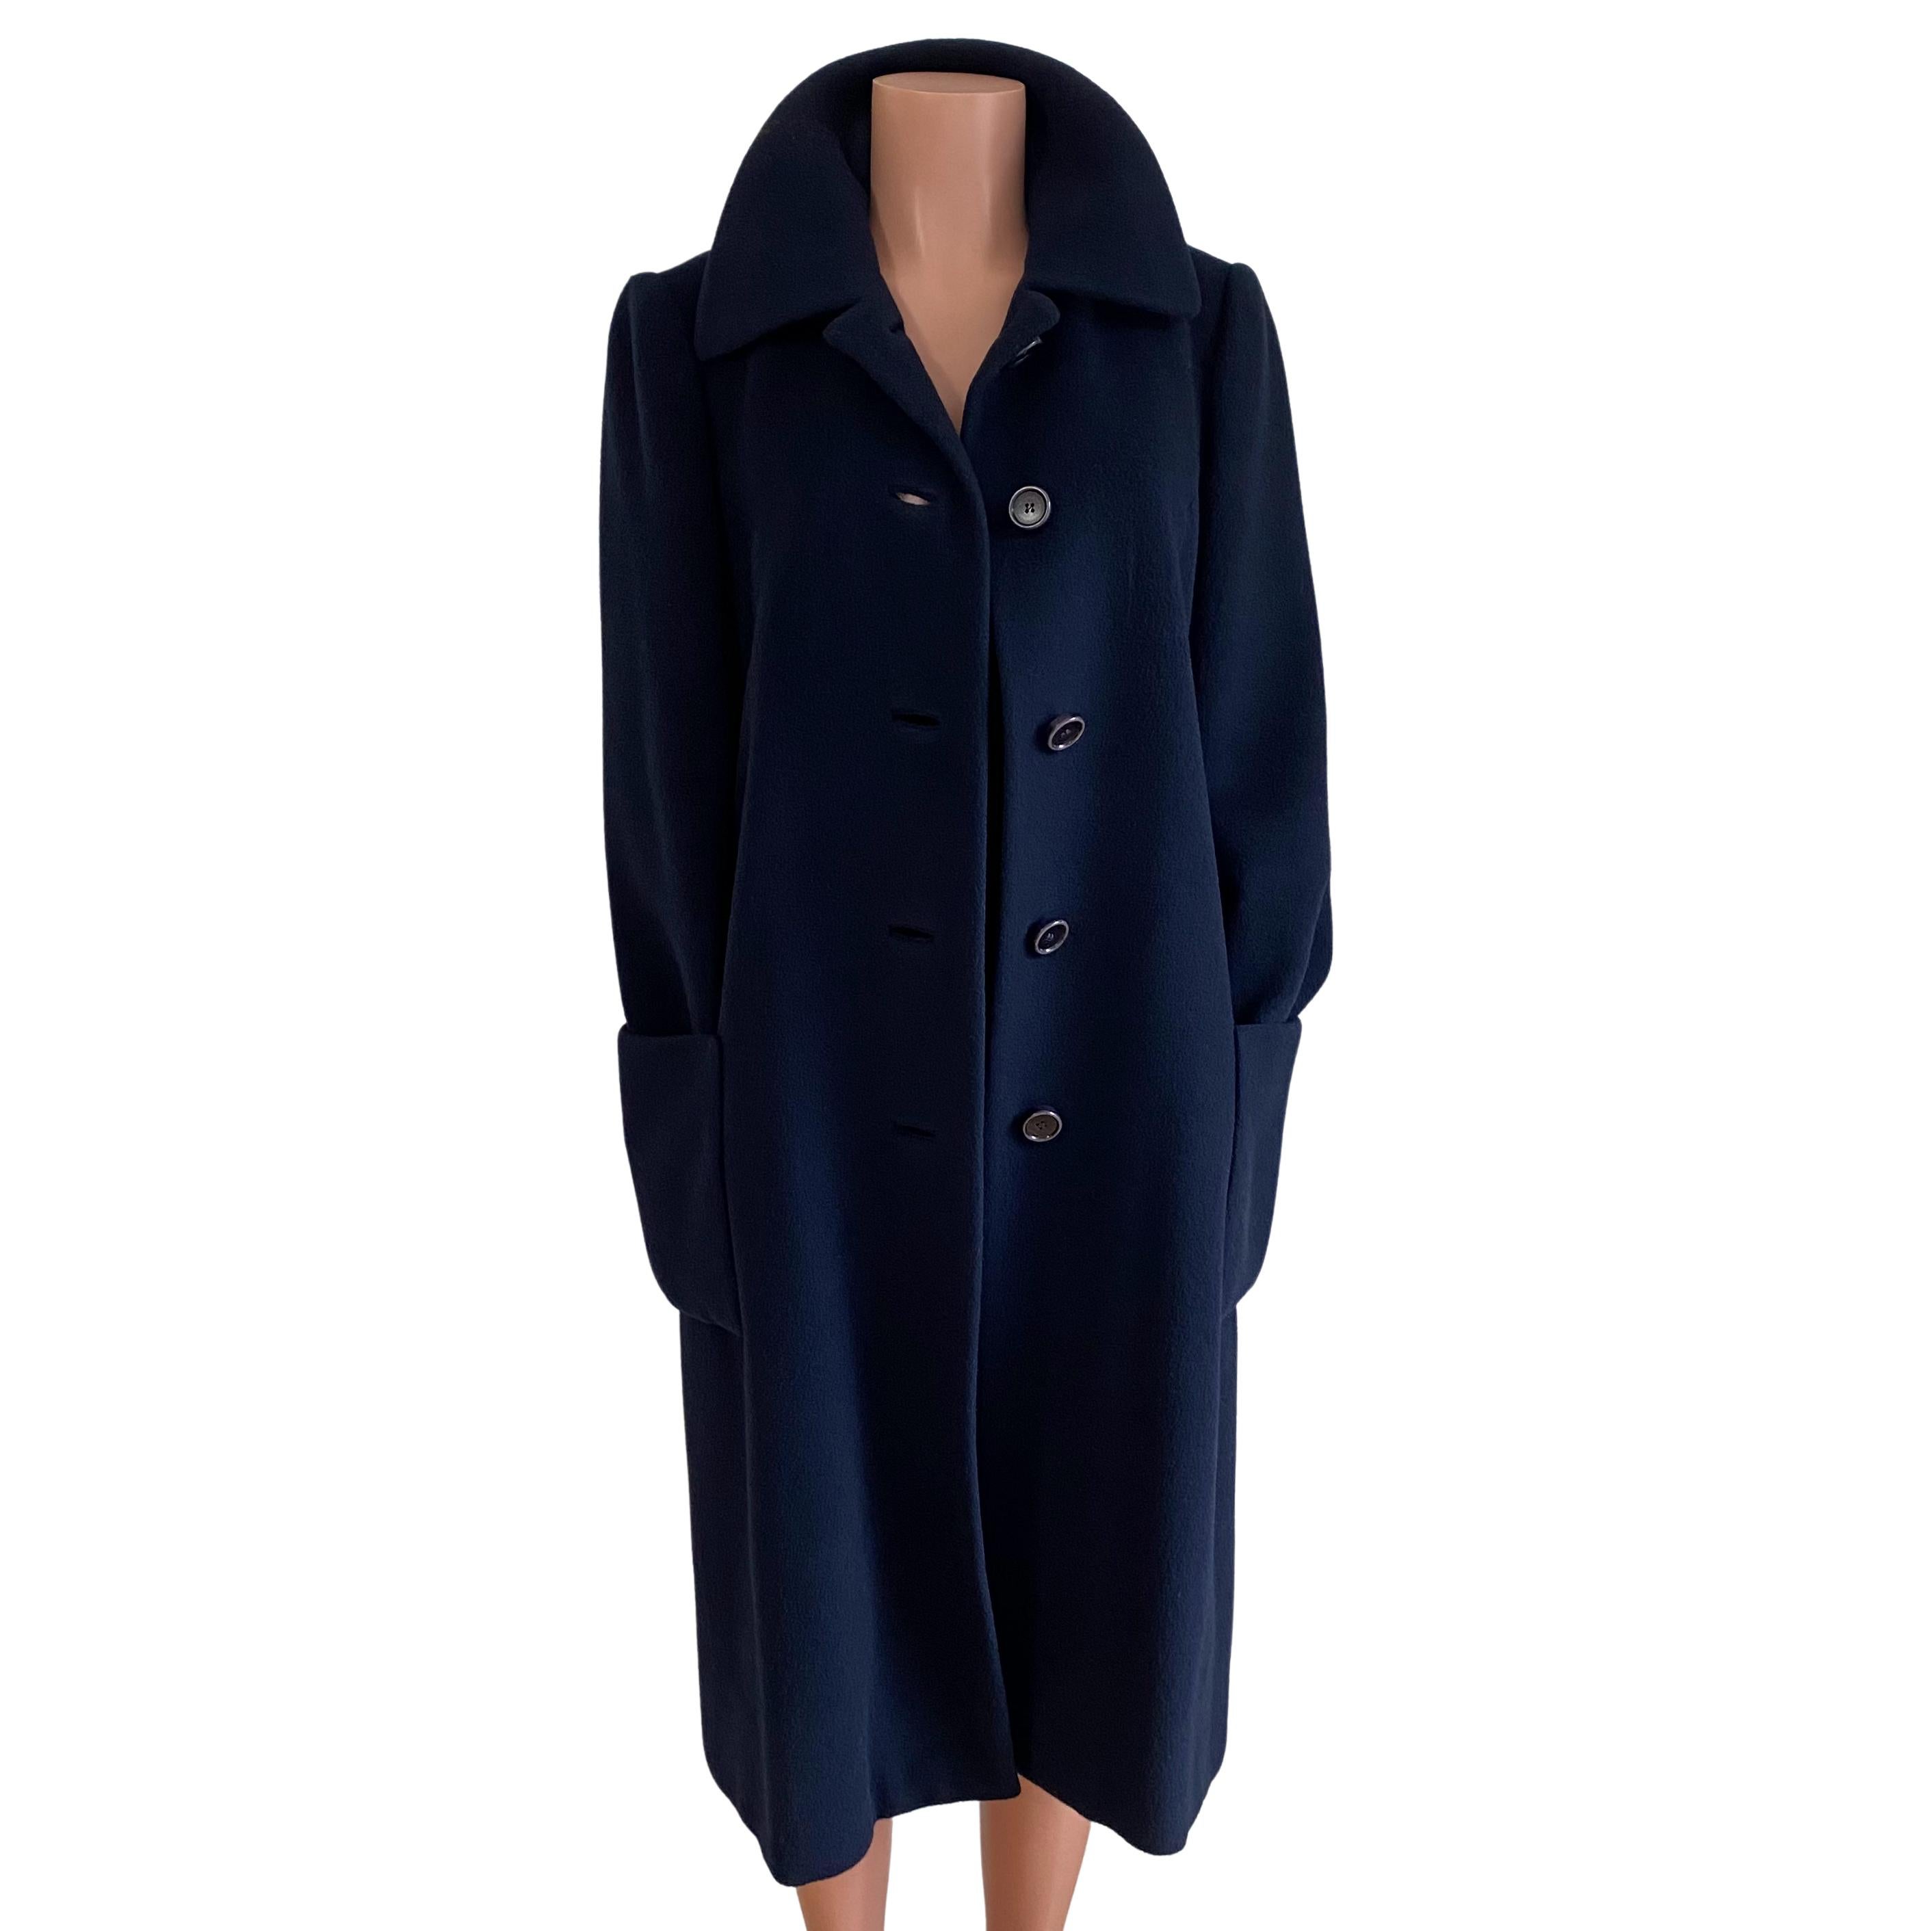 Impeccable classic, chic, timeless coat.
Color is DARK NAVY. Most images have been lightened to show details.
In thick, thick woven cashmere, lined.  
Everything about this coat is bon-chic-bon-genre.

Straight cut. Big tailored patch pockets.